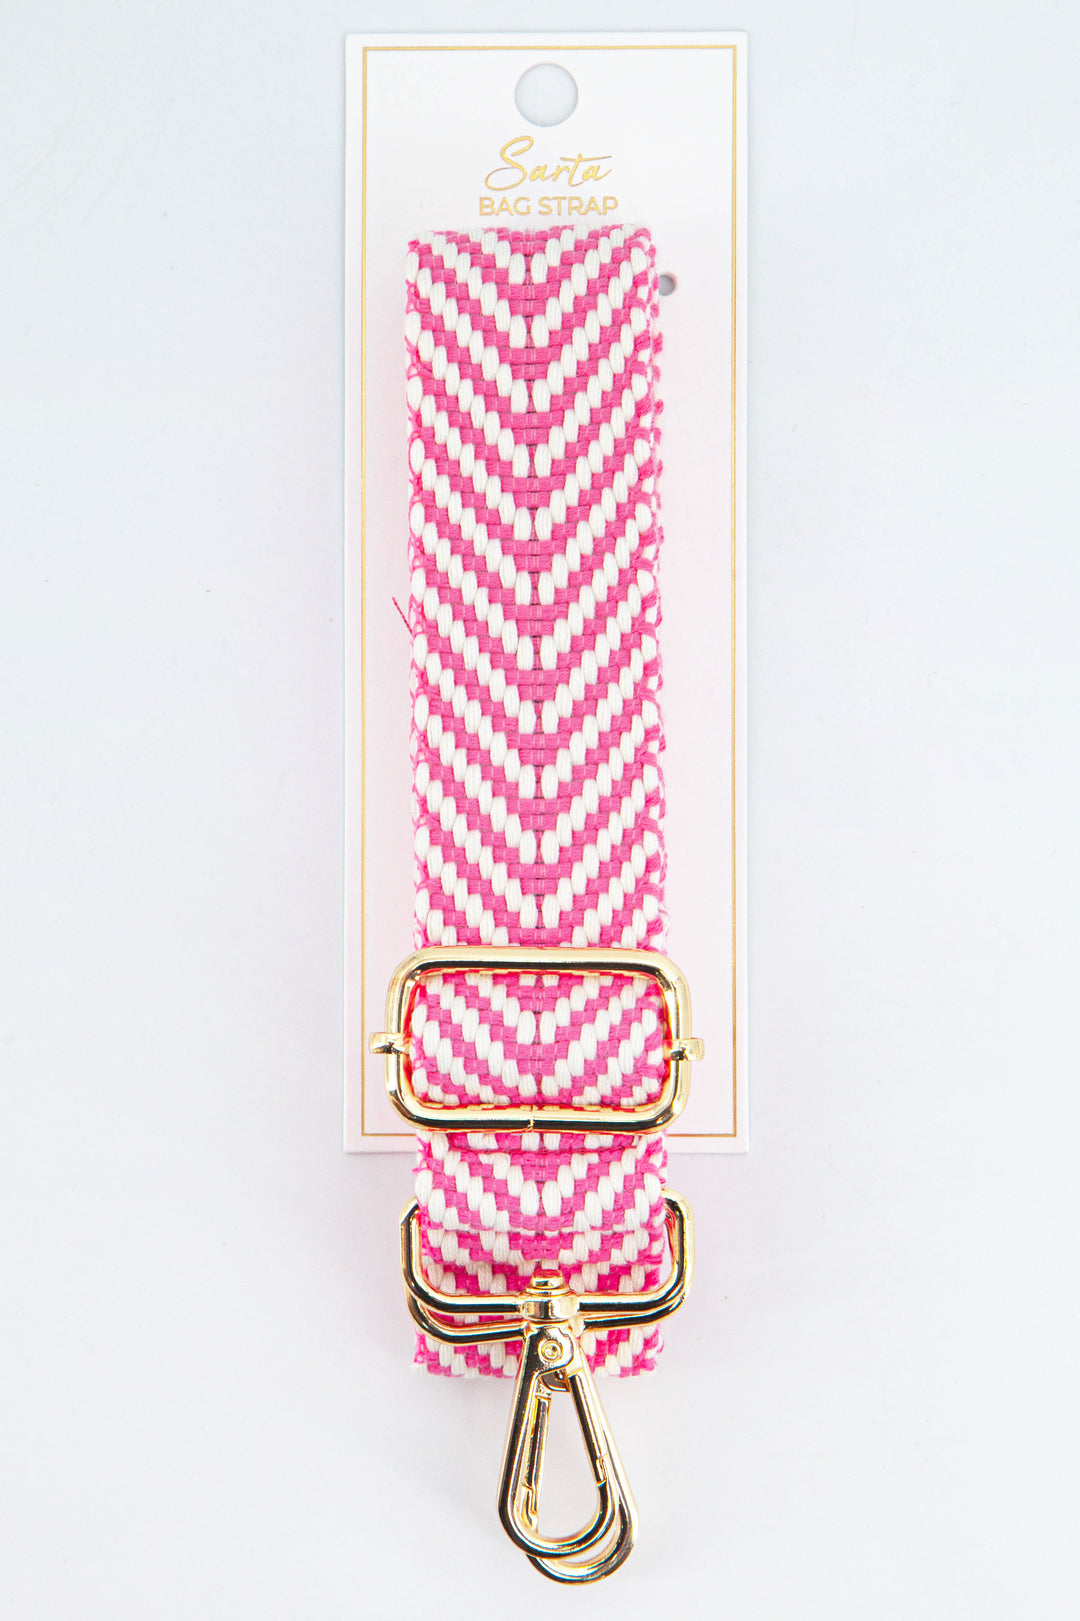 hot pink chevron print woven bag strap with gold hardware